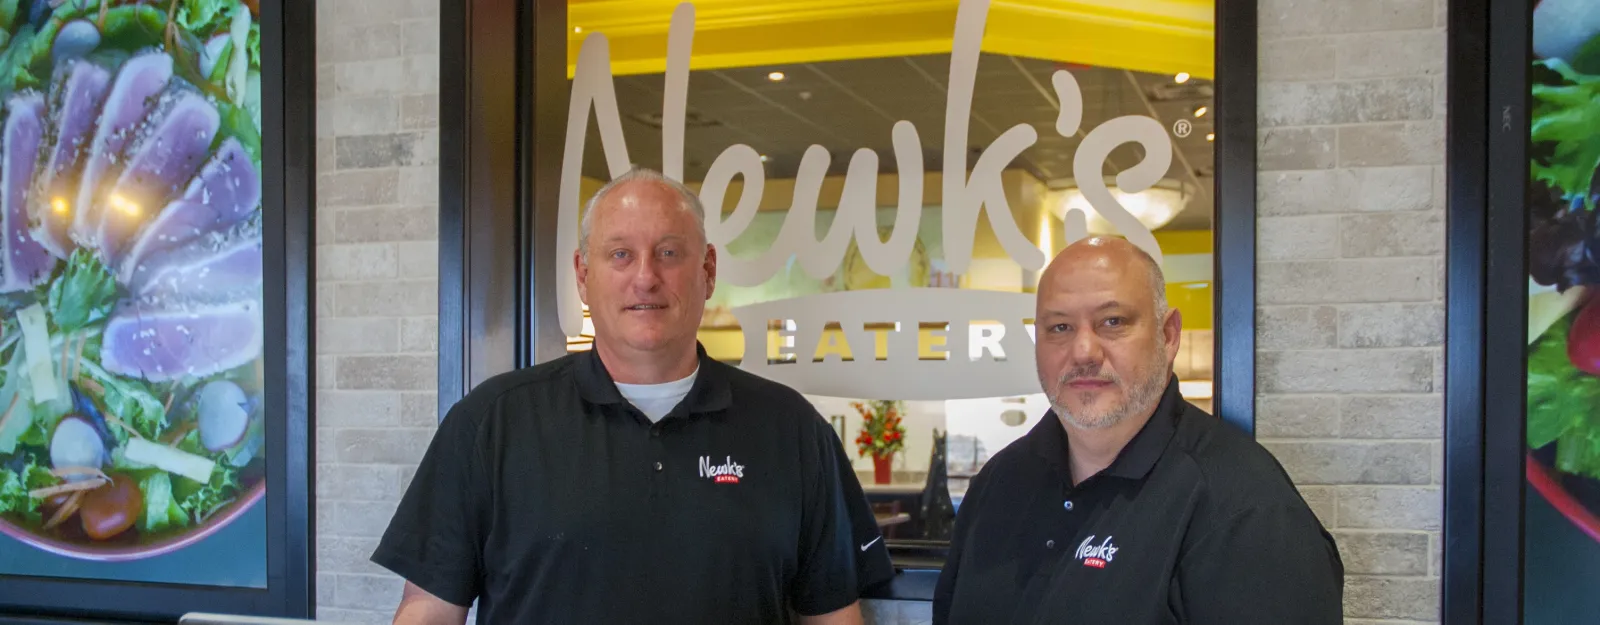 MUST helps Newk's find 'amazing' employees